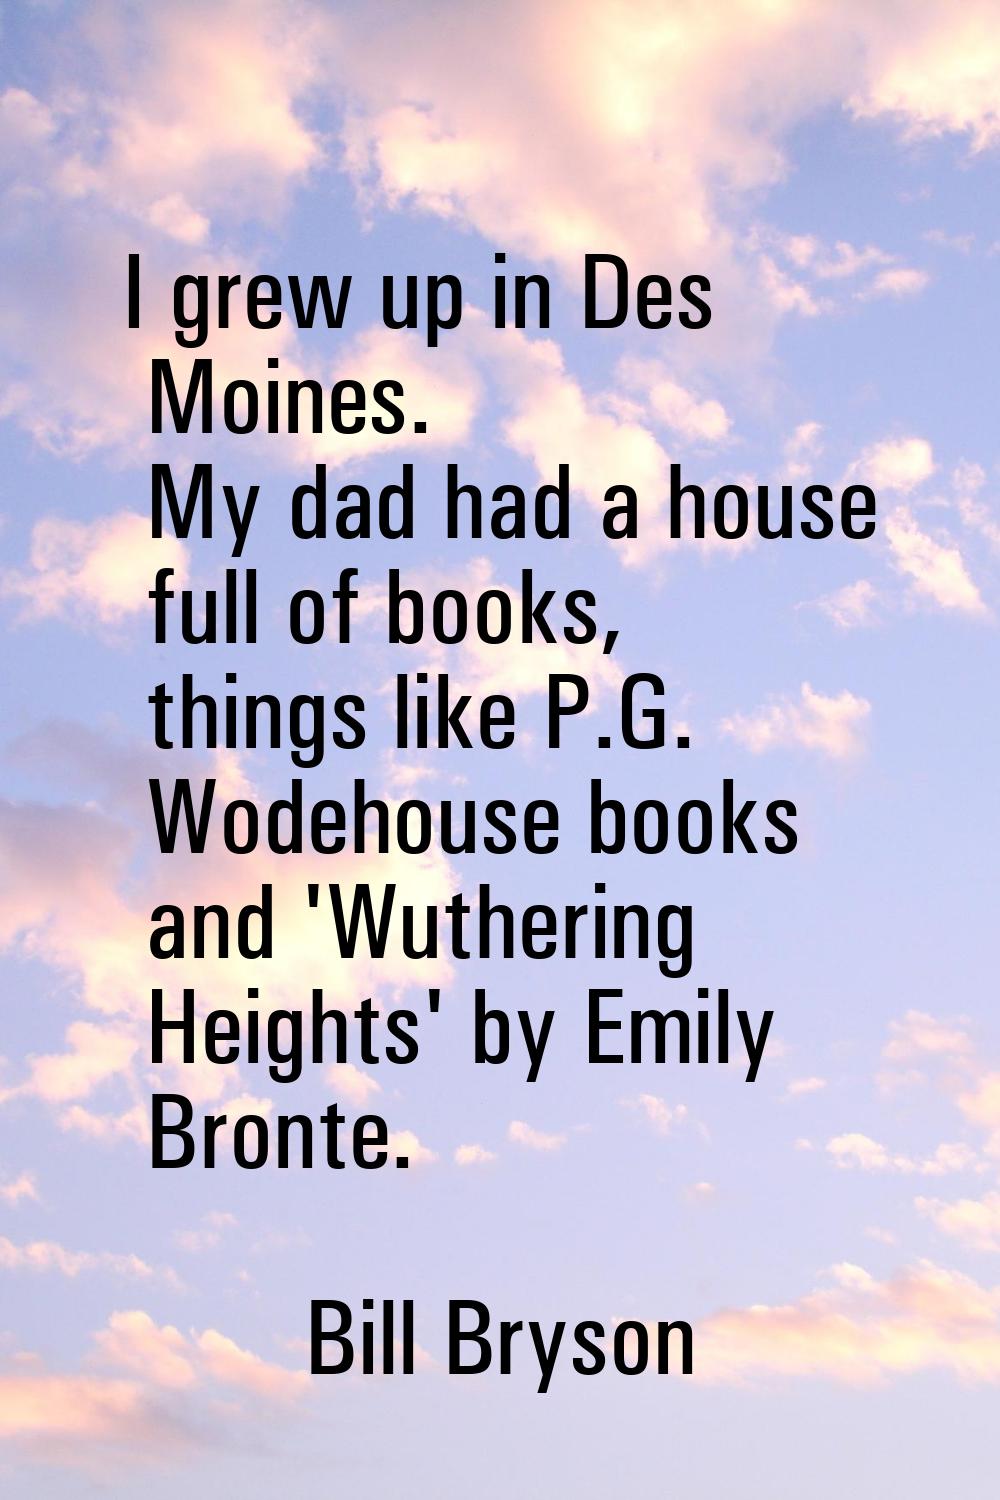 I grew up in Des Moines. My dad had a house full of books, things like P.G. Wodehouse books and 'Wu